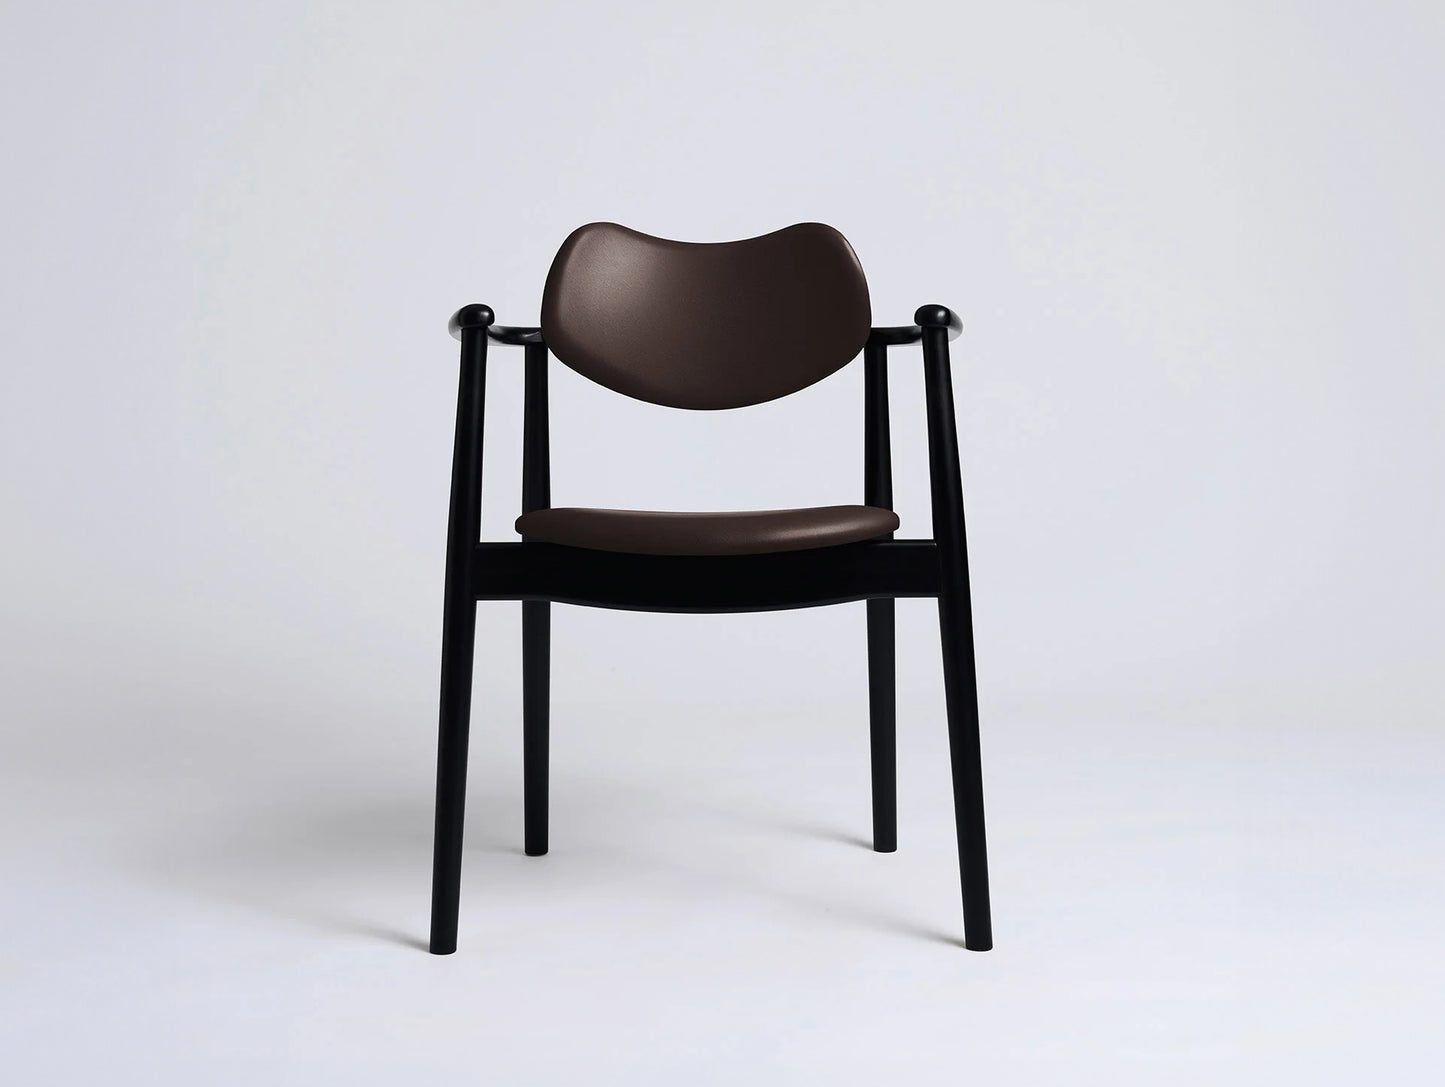 Regatta Chair Seat and Back Upholstered by Ro Collection - Black Lacquered Beech / Exclusive Rio Chocolate Brown Leather